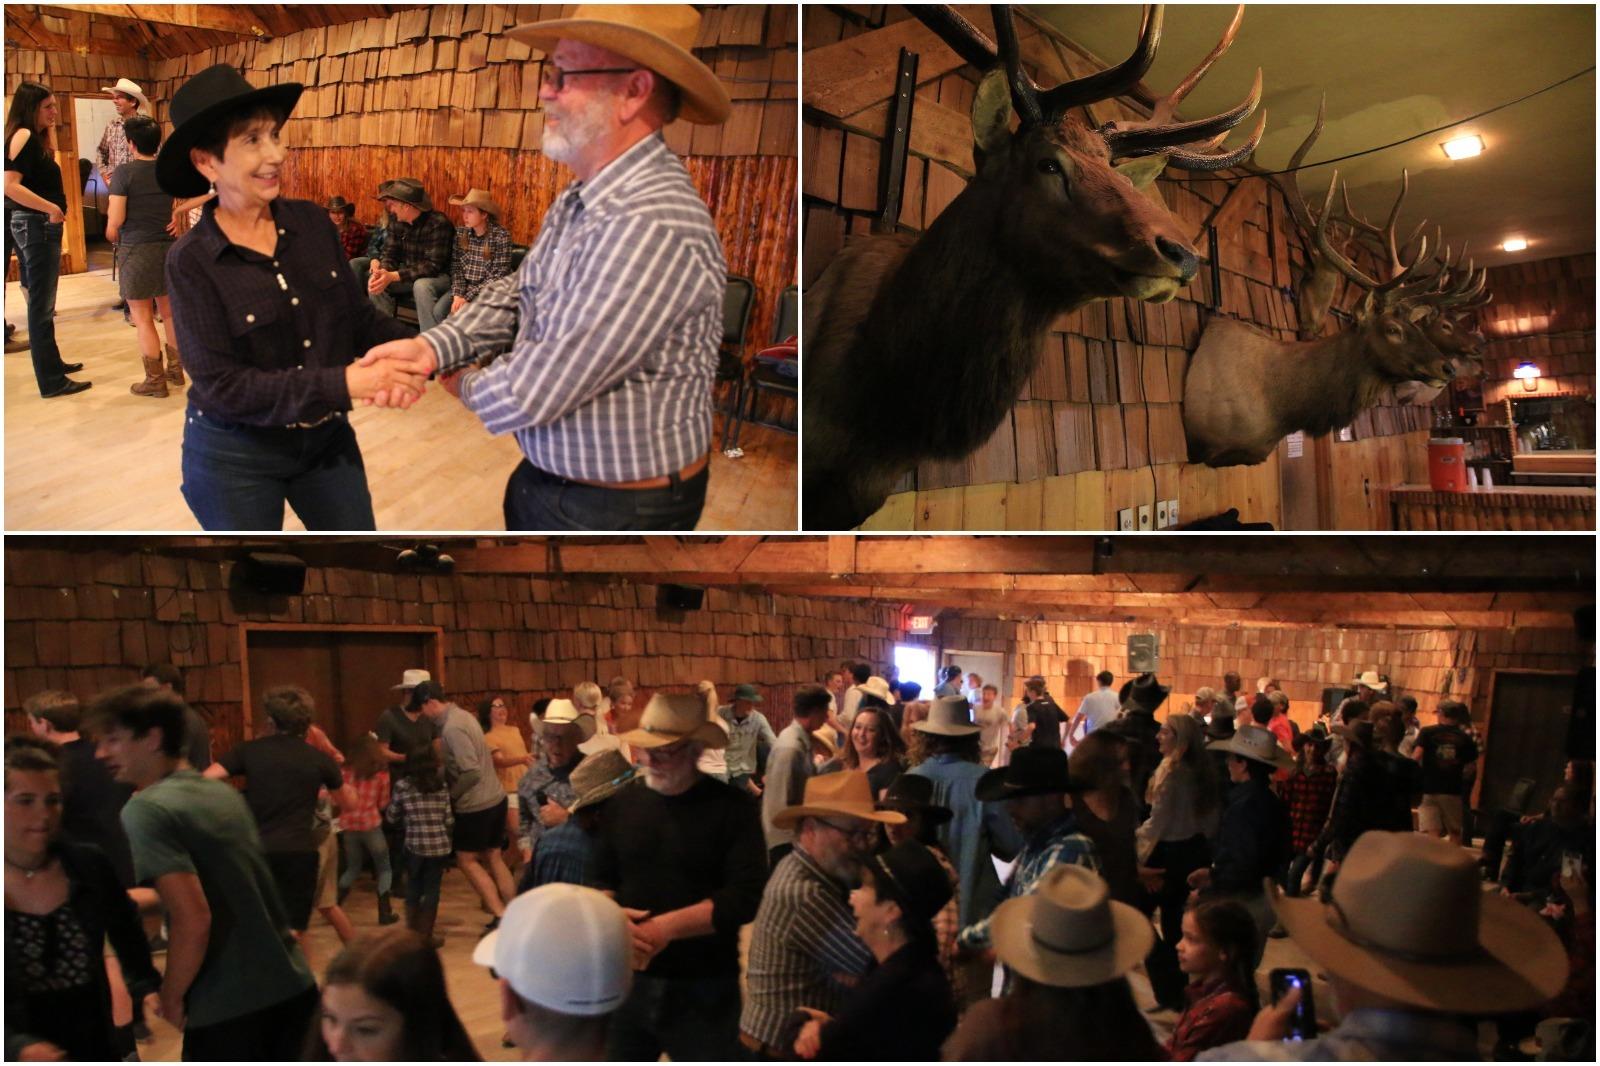 Three images of square dancing in Dubois, Wyoming